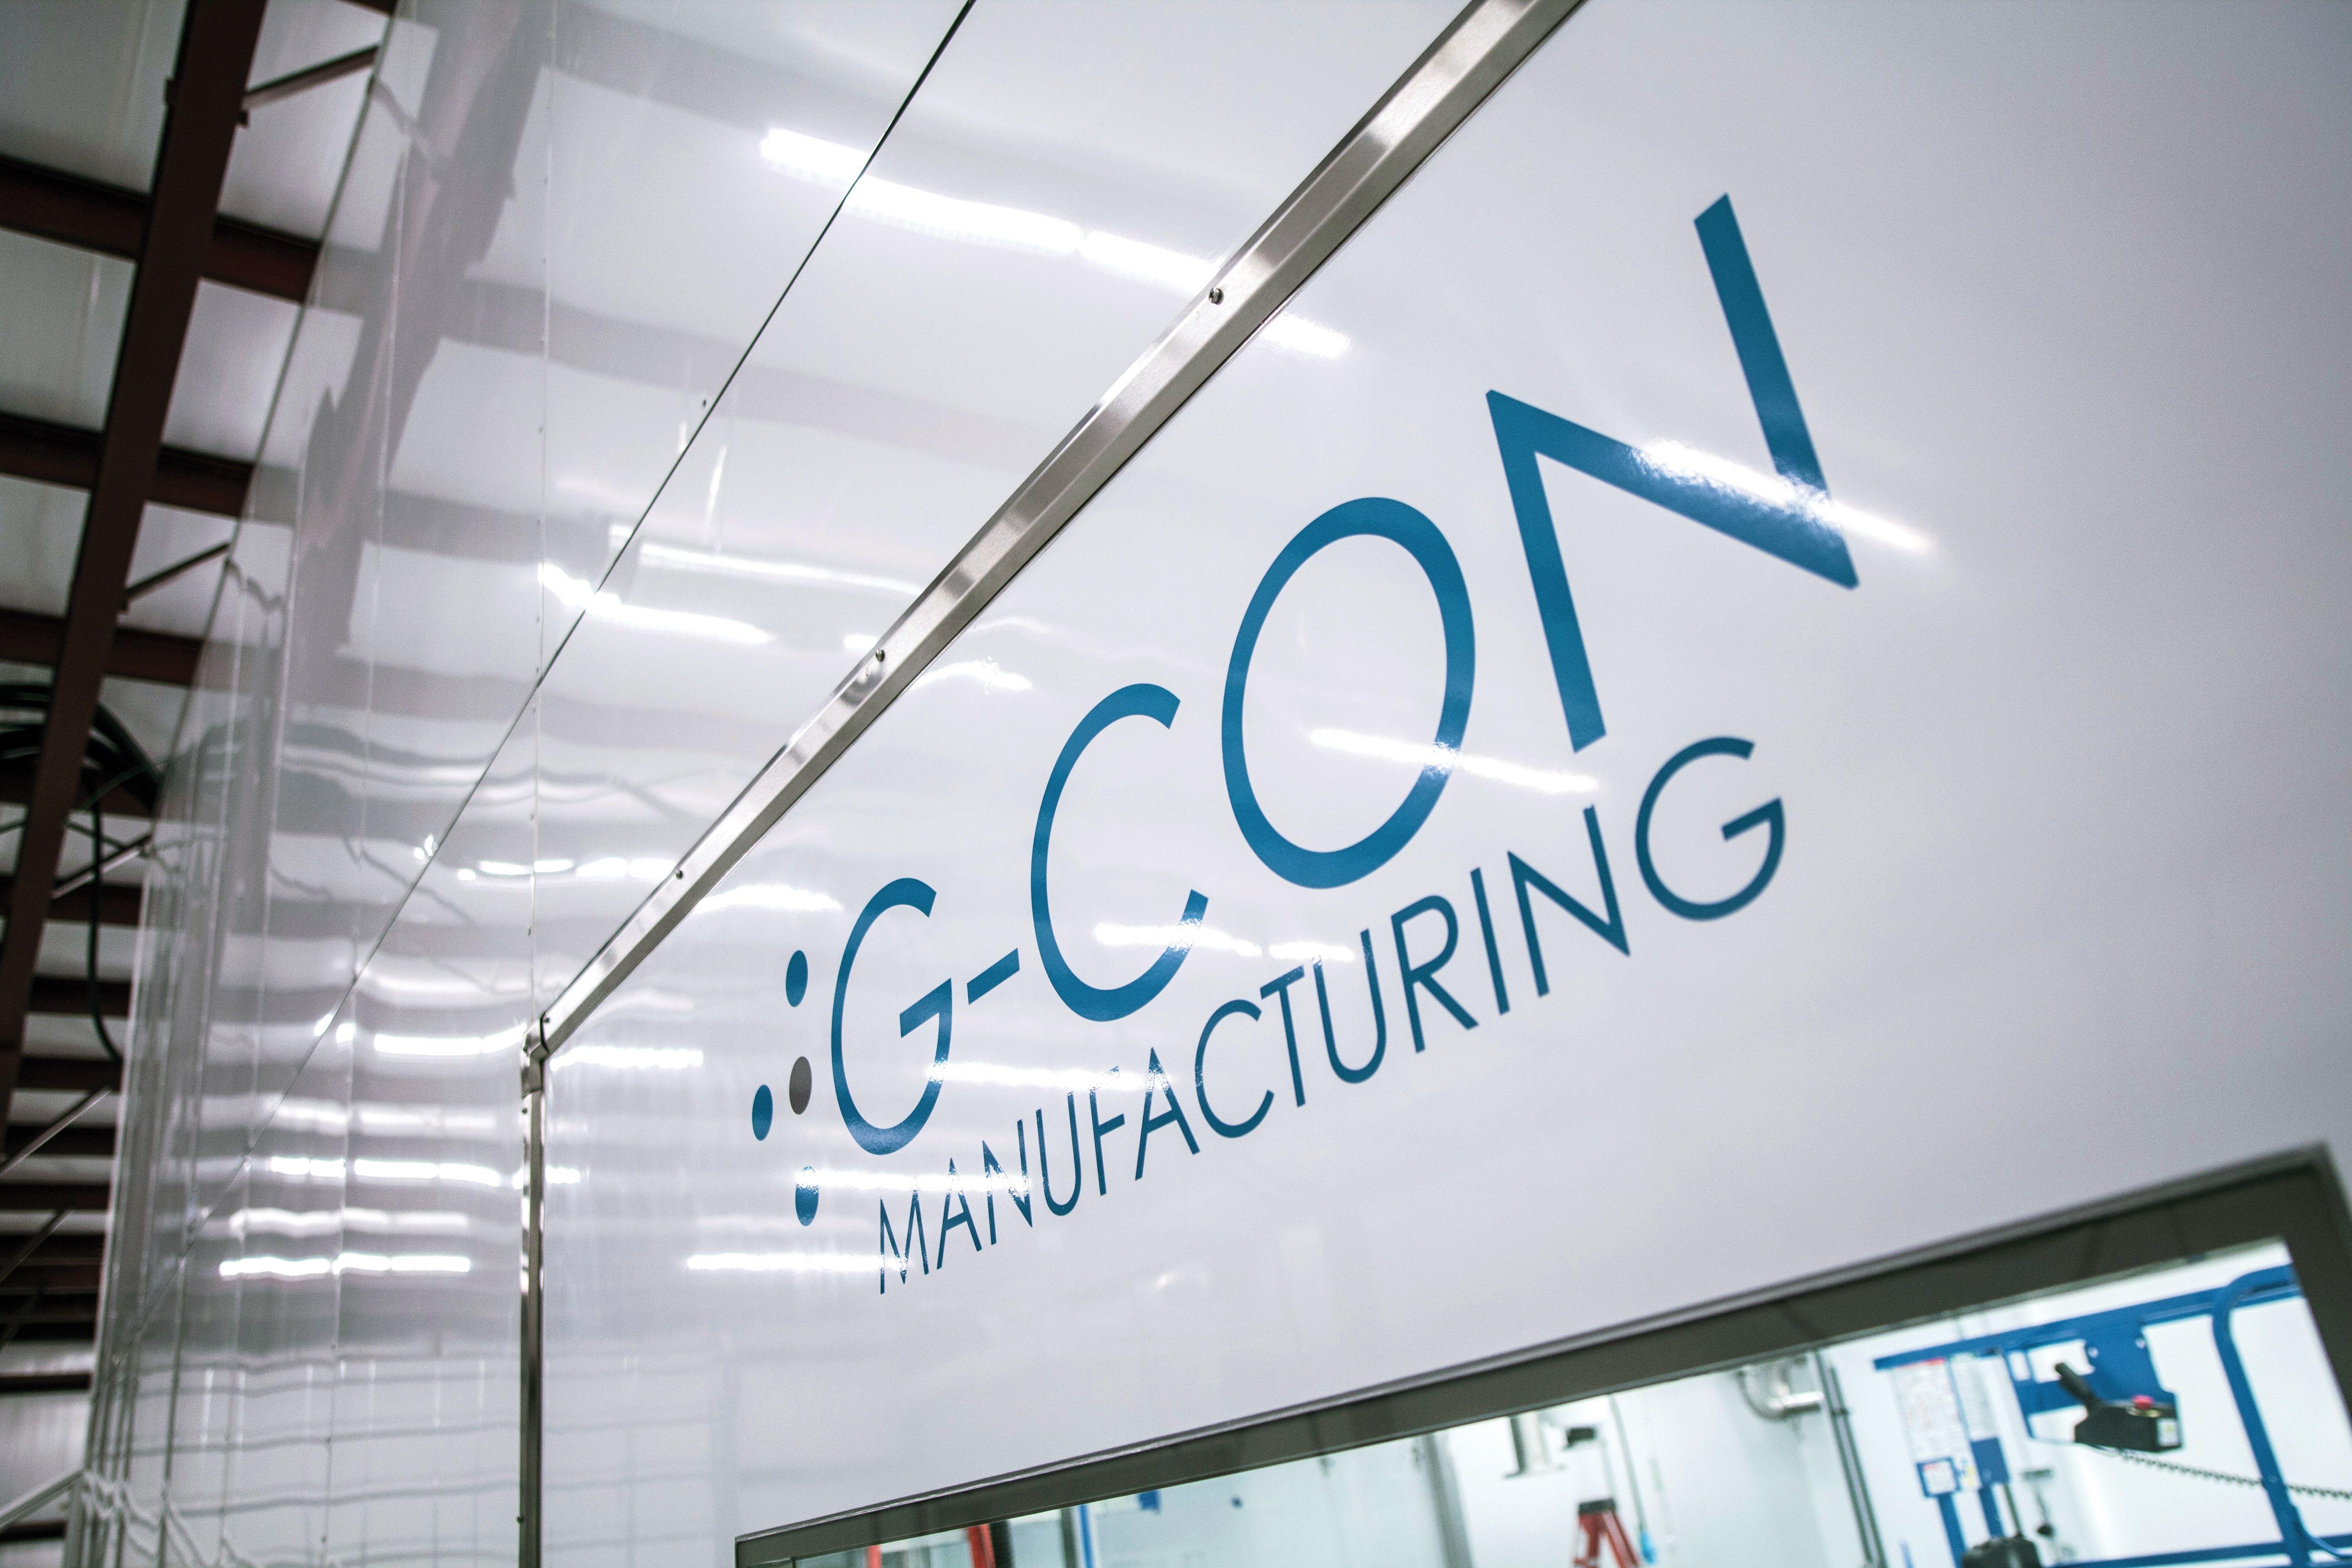 Gcon Logo - G-CON Manufacturing | United States | Prefabricated Cleanrooms